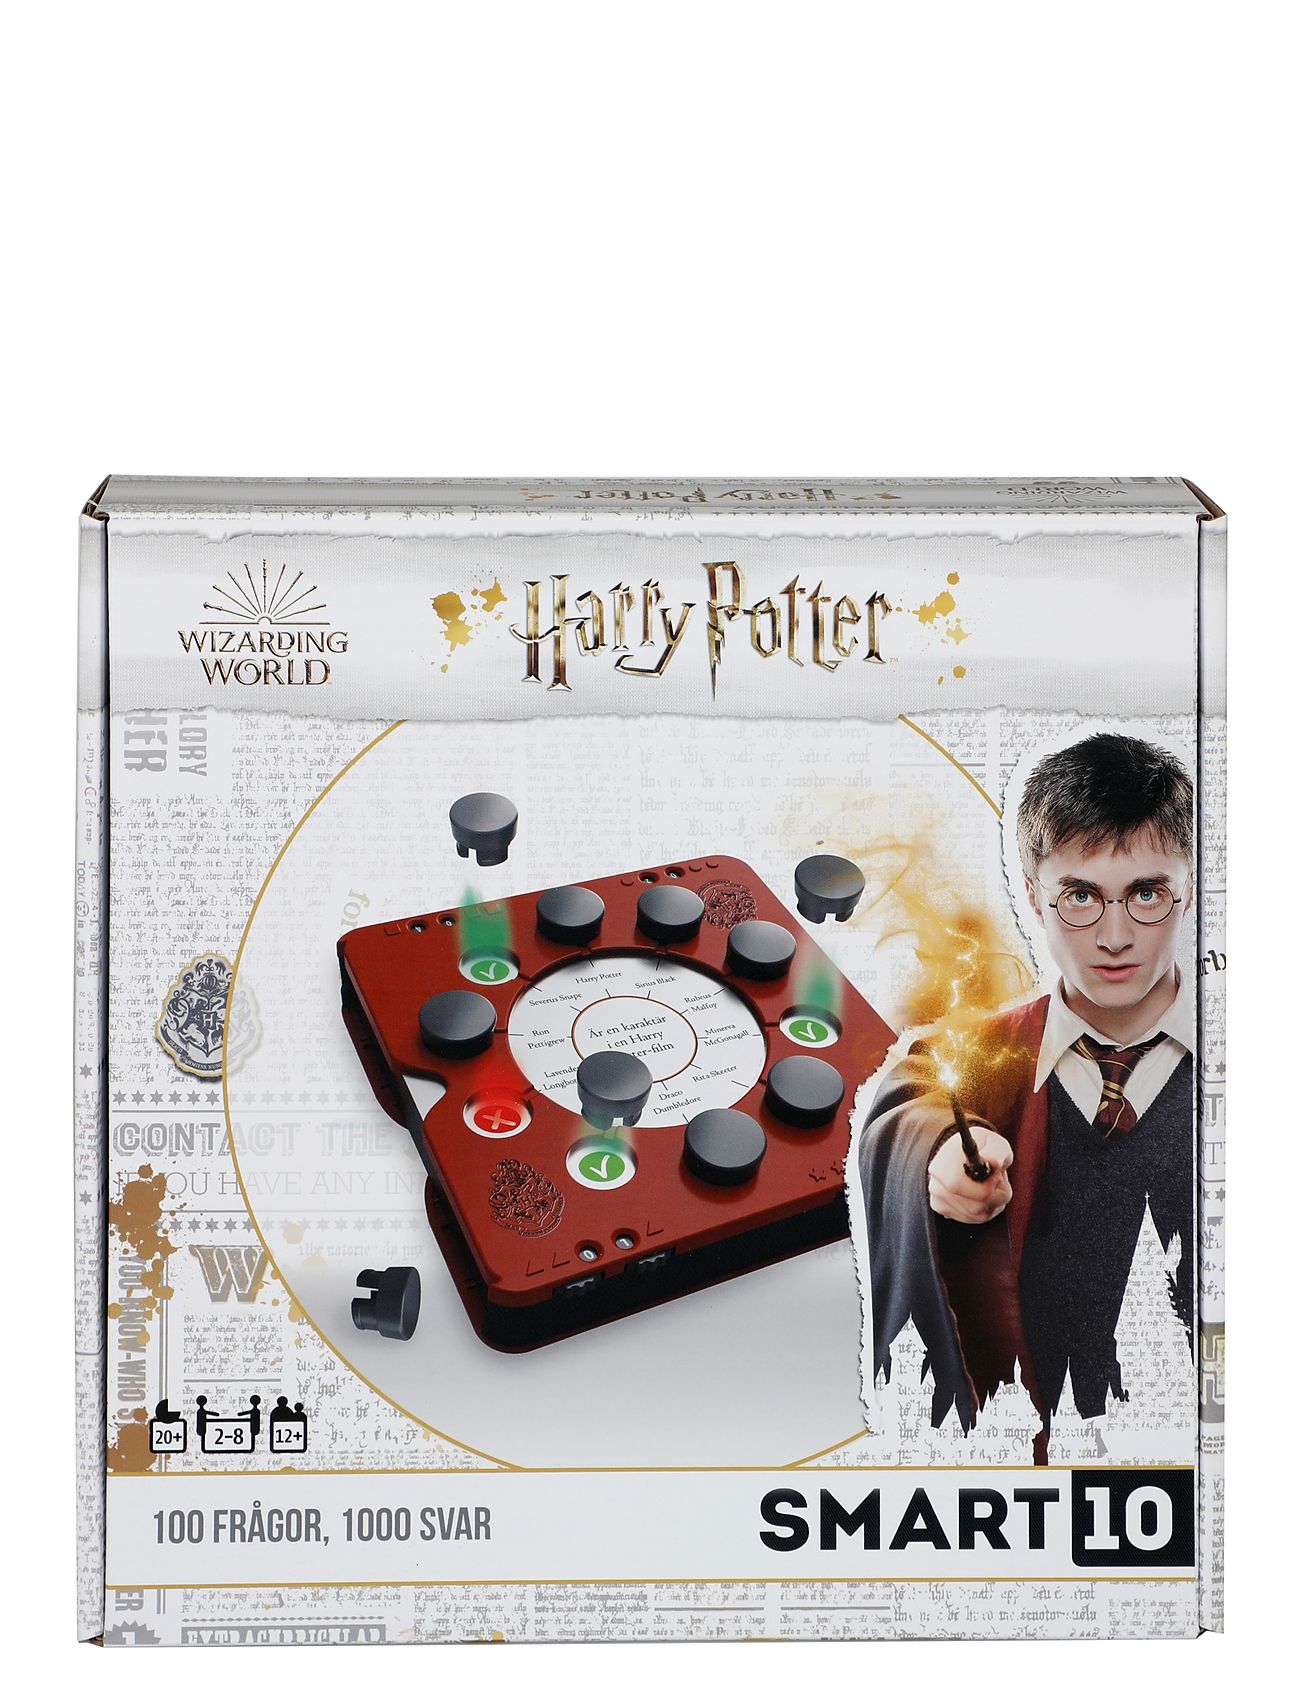 Smart10 Harry Potter Se Toys Puzzles And Games Games Board Games Multi/patterned Martinex